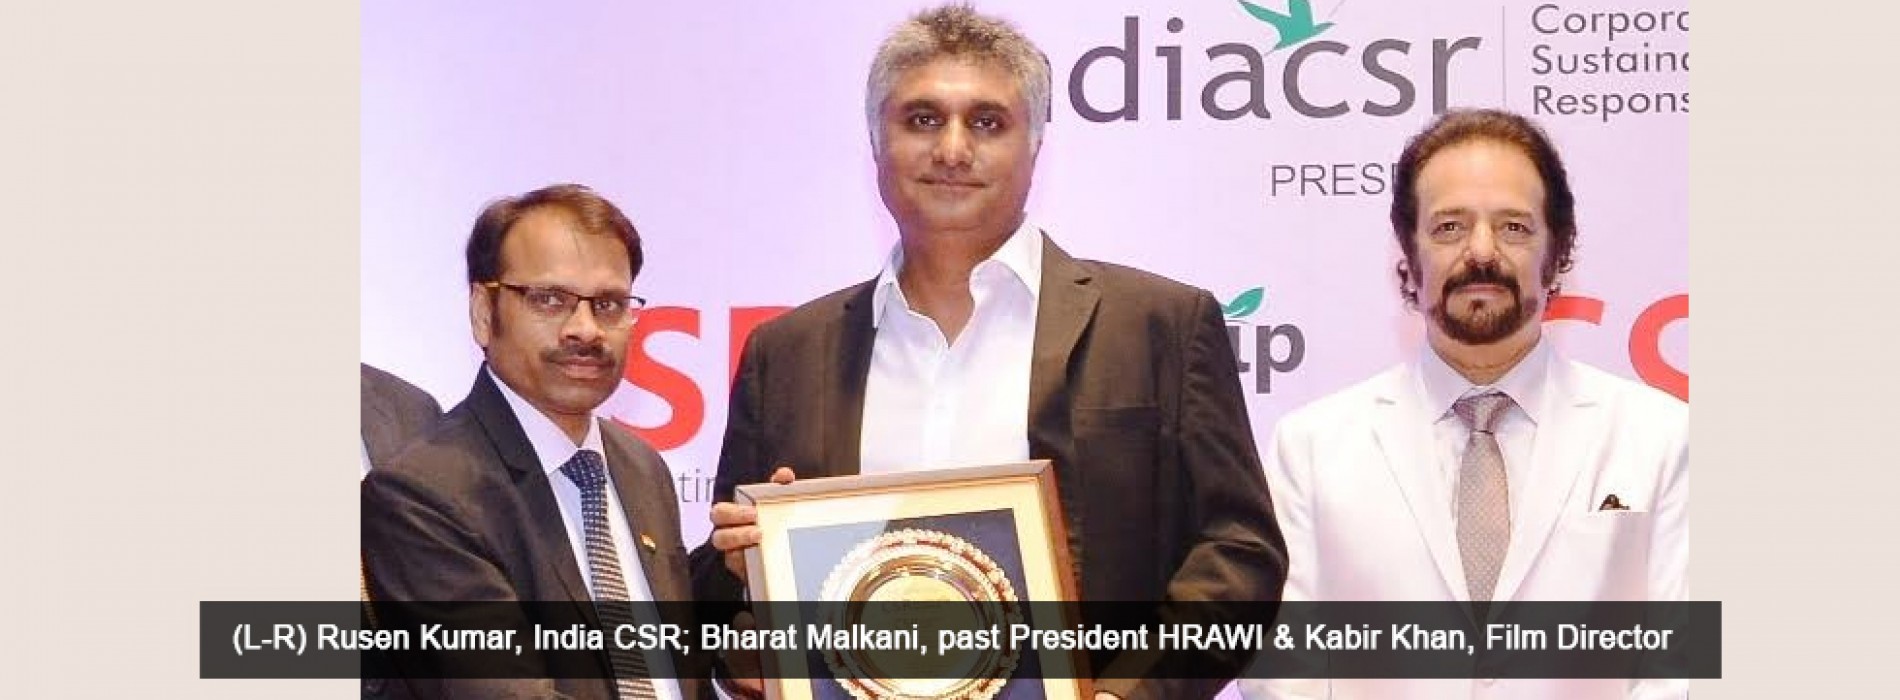 HRAWI’s Project Pickle initiative receives accolades at India CSR Leadership Summit & Awards 2017